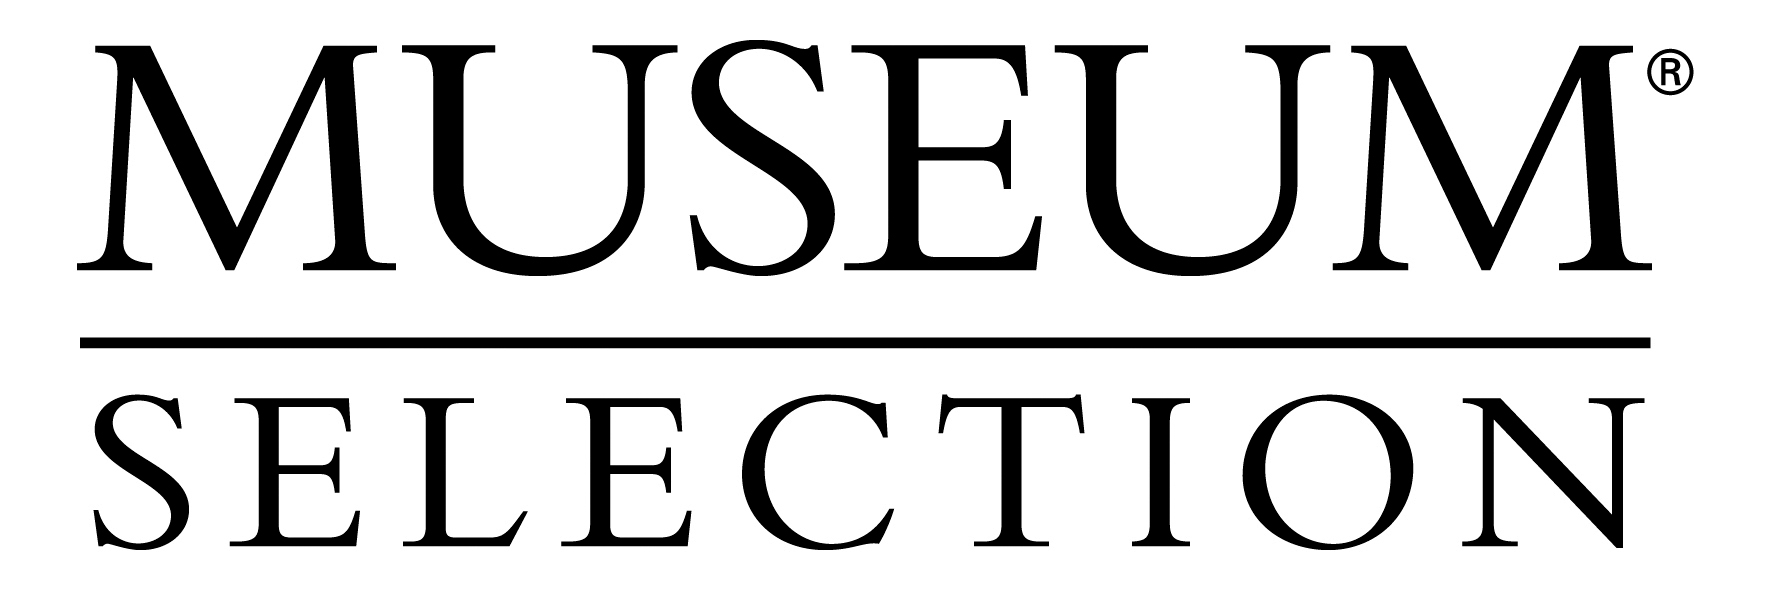 Museum Selection Coupons & Promo Codes